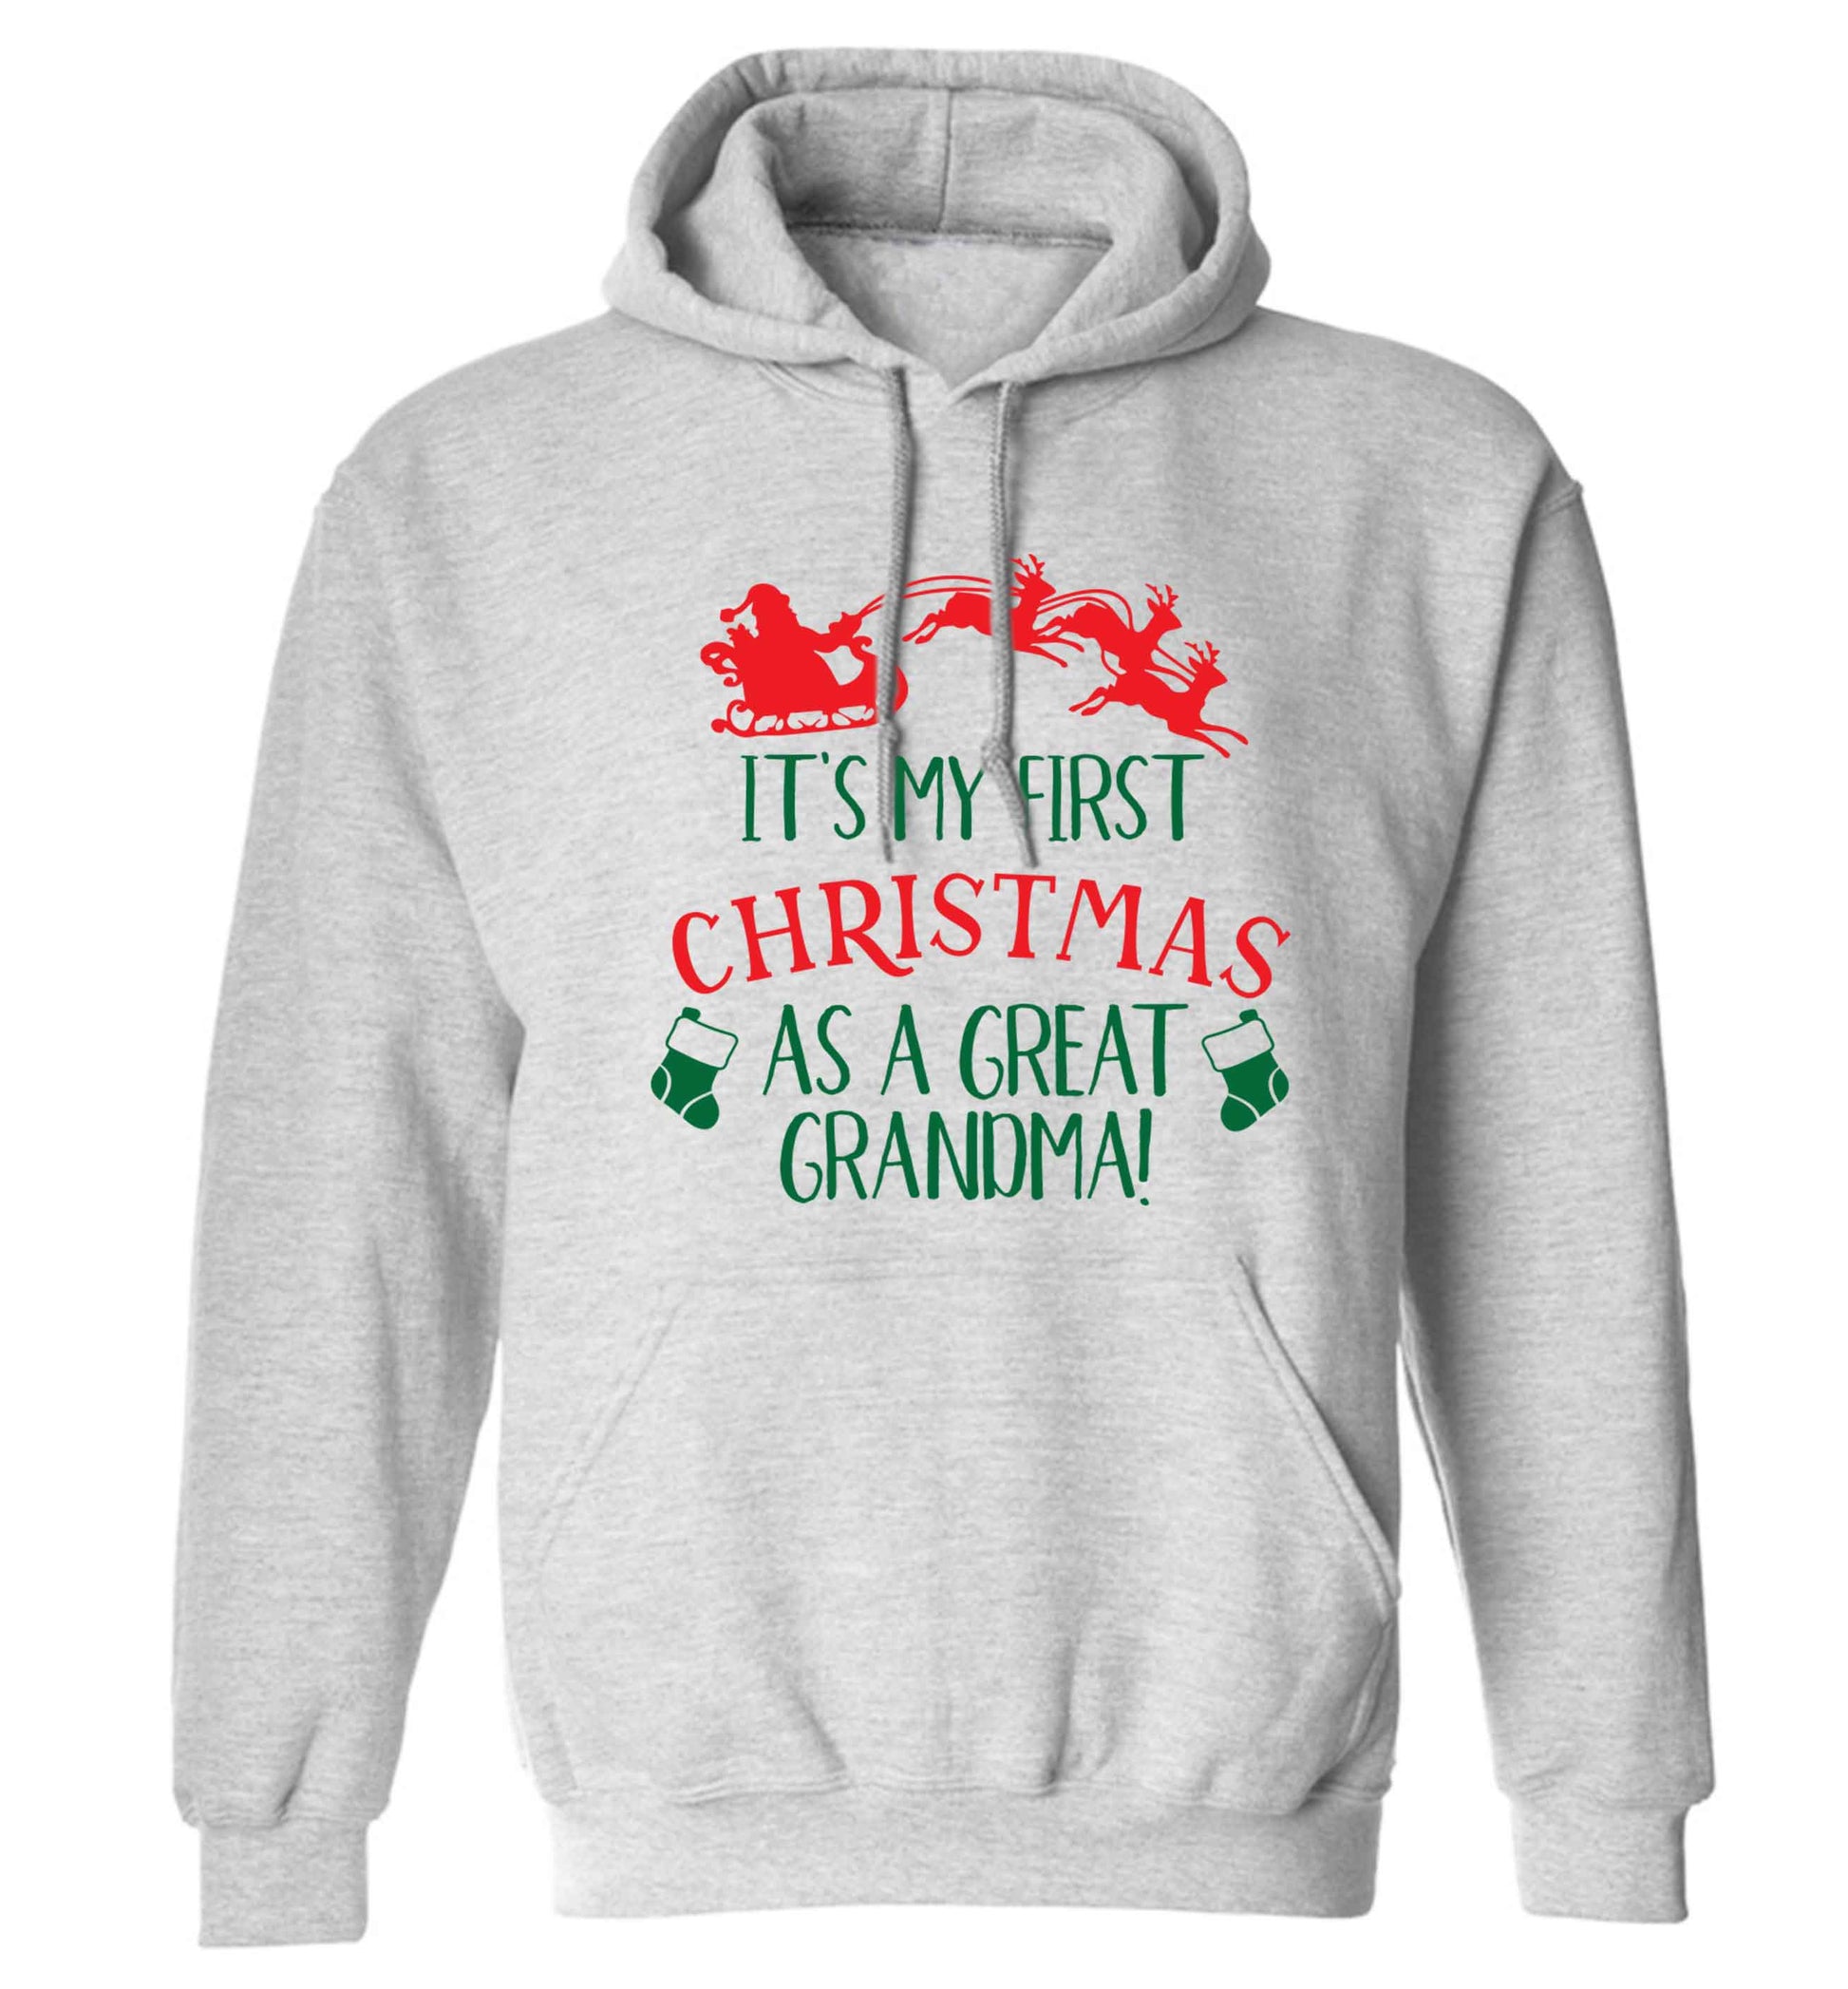 It's my first Christmas as a great grandma! adults unisex grey hoodie 2XL